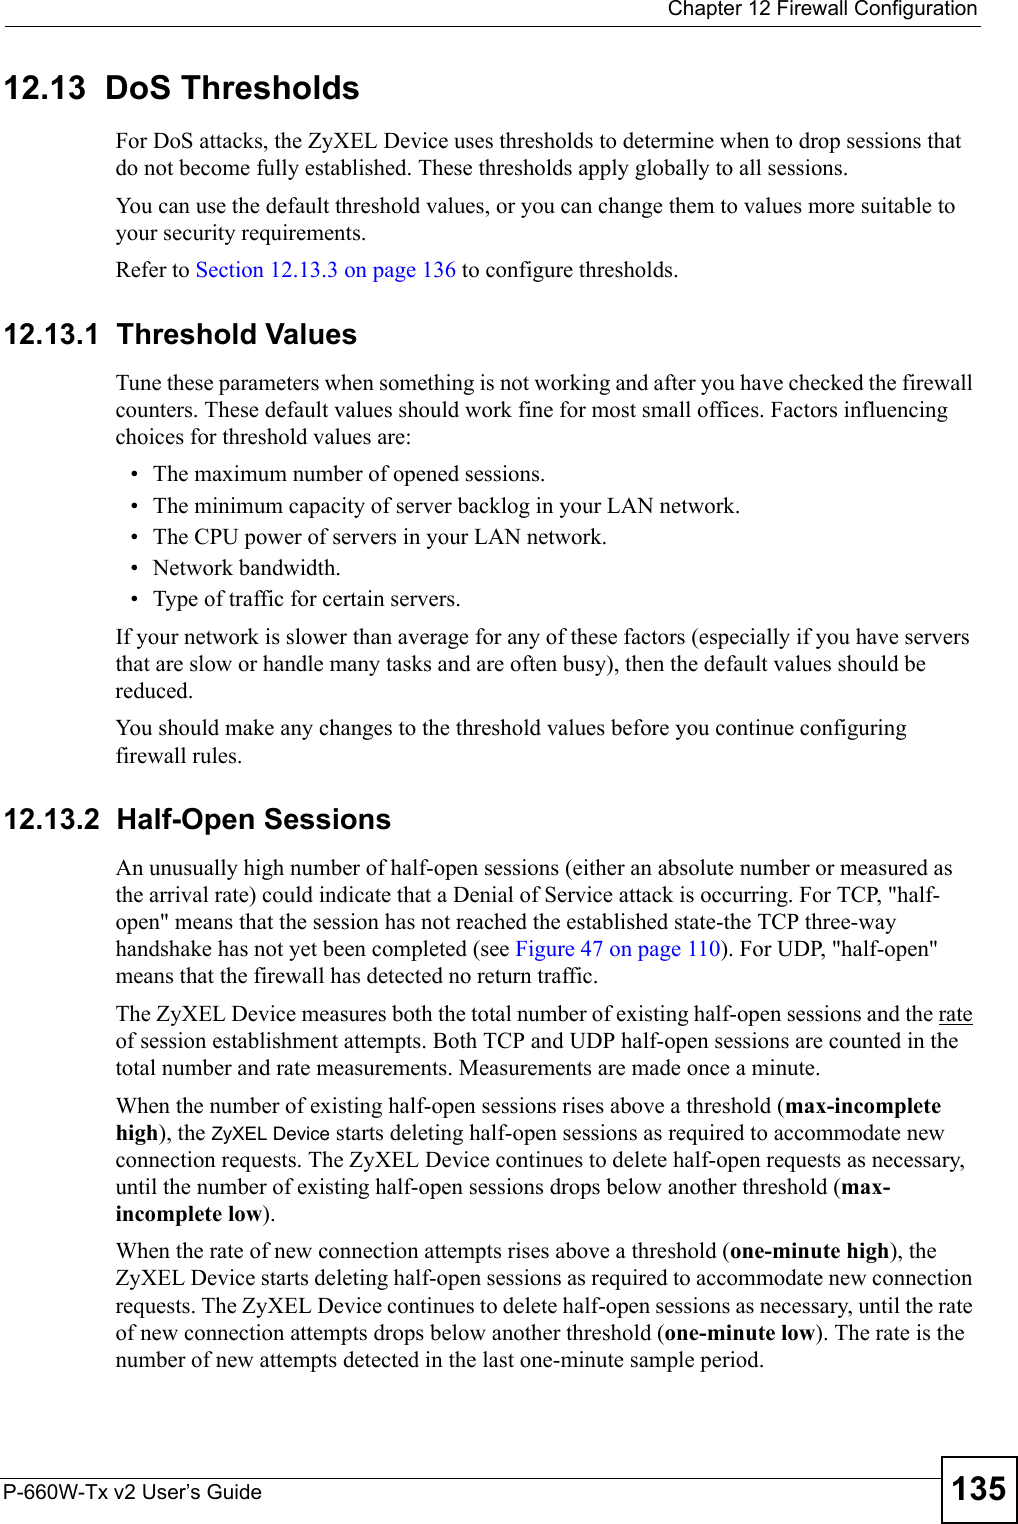  Chapter 12 Firewall ConfigurationP-660W-Tx v2 User’s Guide 13512.13  DoS Thresholds For DoS attacks, the ZyXEL Device uses thresholds to determine when to drop sessions that do not become fully established. These thresholds apply globally to all sessions.You can use the default threshold values, or you can change them to values more suitable to your security requirements.Refer to Section 12.13.3 on page 136 to configure thresholds. 12.13.1  Threshold ValuesTune these parameters when something is not working and after you have checked the firewall counters. These default values should work fine for most small offices. Factors influencing choices for threshold values are:• The maximum number of opened sessions.• The minimum capacity of server backlog in your LAN network.• The CPU power of servers in your LAN network.• Network bandwidth. • Type of traffic for certain servers.If your network is slower than average for any of these factors (especially if you have servers that are slow or handle many tasks and are often busy), then the default values should be reduced.You should make any changes to the threshold values before you continue configuring firewall rules. 12.13.2  Half-Open SessionsAn unusually high number of half-open sessions (either an absolute number or measured as the arrival rate) could indicate that a Denial of Service attack is occurring. For TCP, &quot;half-open&quot; means that the session has not reached the established state-the TCP three-way handshake has not yet been completed (see Figure 47 on page 110). For UDP, &quot;half-open&quot; means that the firewall has detected no return traffic.The ZyXEL Device measures both the total number of existing half-open sessions and the rate of session establishment attempts. Both TCP and UDP half-open sessions are counted in the total number and rate measurements. Measurements are made once a minute.When the number of existing half-open sessions rises above a threshold (max-incomplete high), the ZyXEL Device starts deleting half-open sessions as required to accommodate new connection requests. The ZyXEL Device continues to delete half-open requests as necessary, until the number of existing half-open sessions drops below another threshold (max-incomplete low).When the rate of new connection attempts rises above a threshold (one-minute high), the ZyXEL Device starts deleting half-open sessions as required to accommodate new connection requests. The ZyXEL Device continues to delete half-open sessions as necessary, until the rate of new connection attempts drops below another threshold (one-minute low). The rate is the number of new attempts detected in the last one-minute sample period.